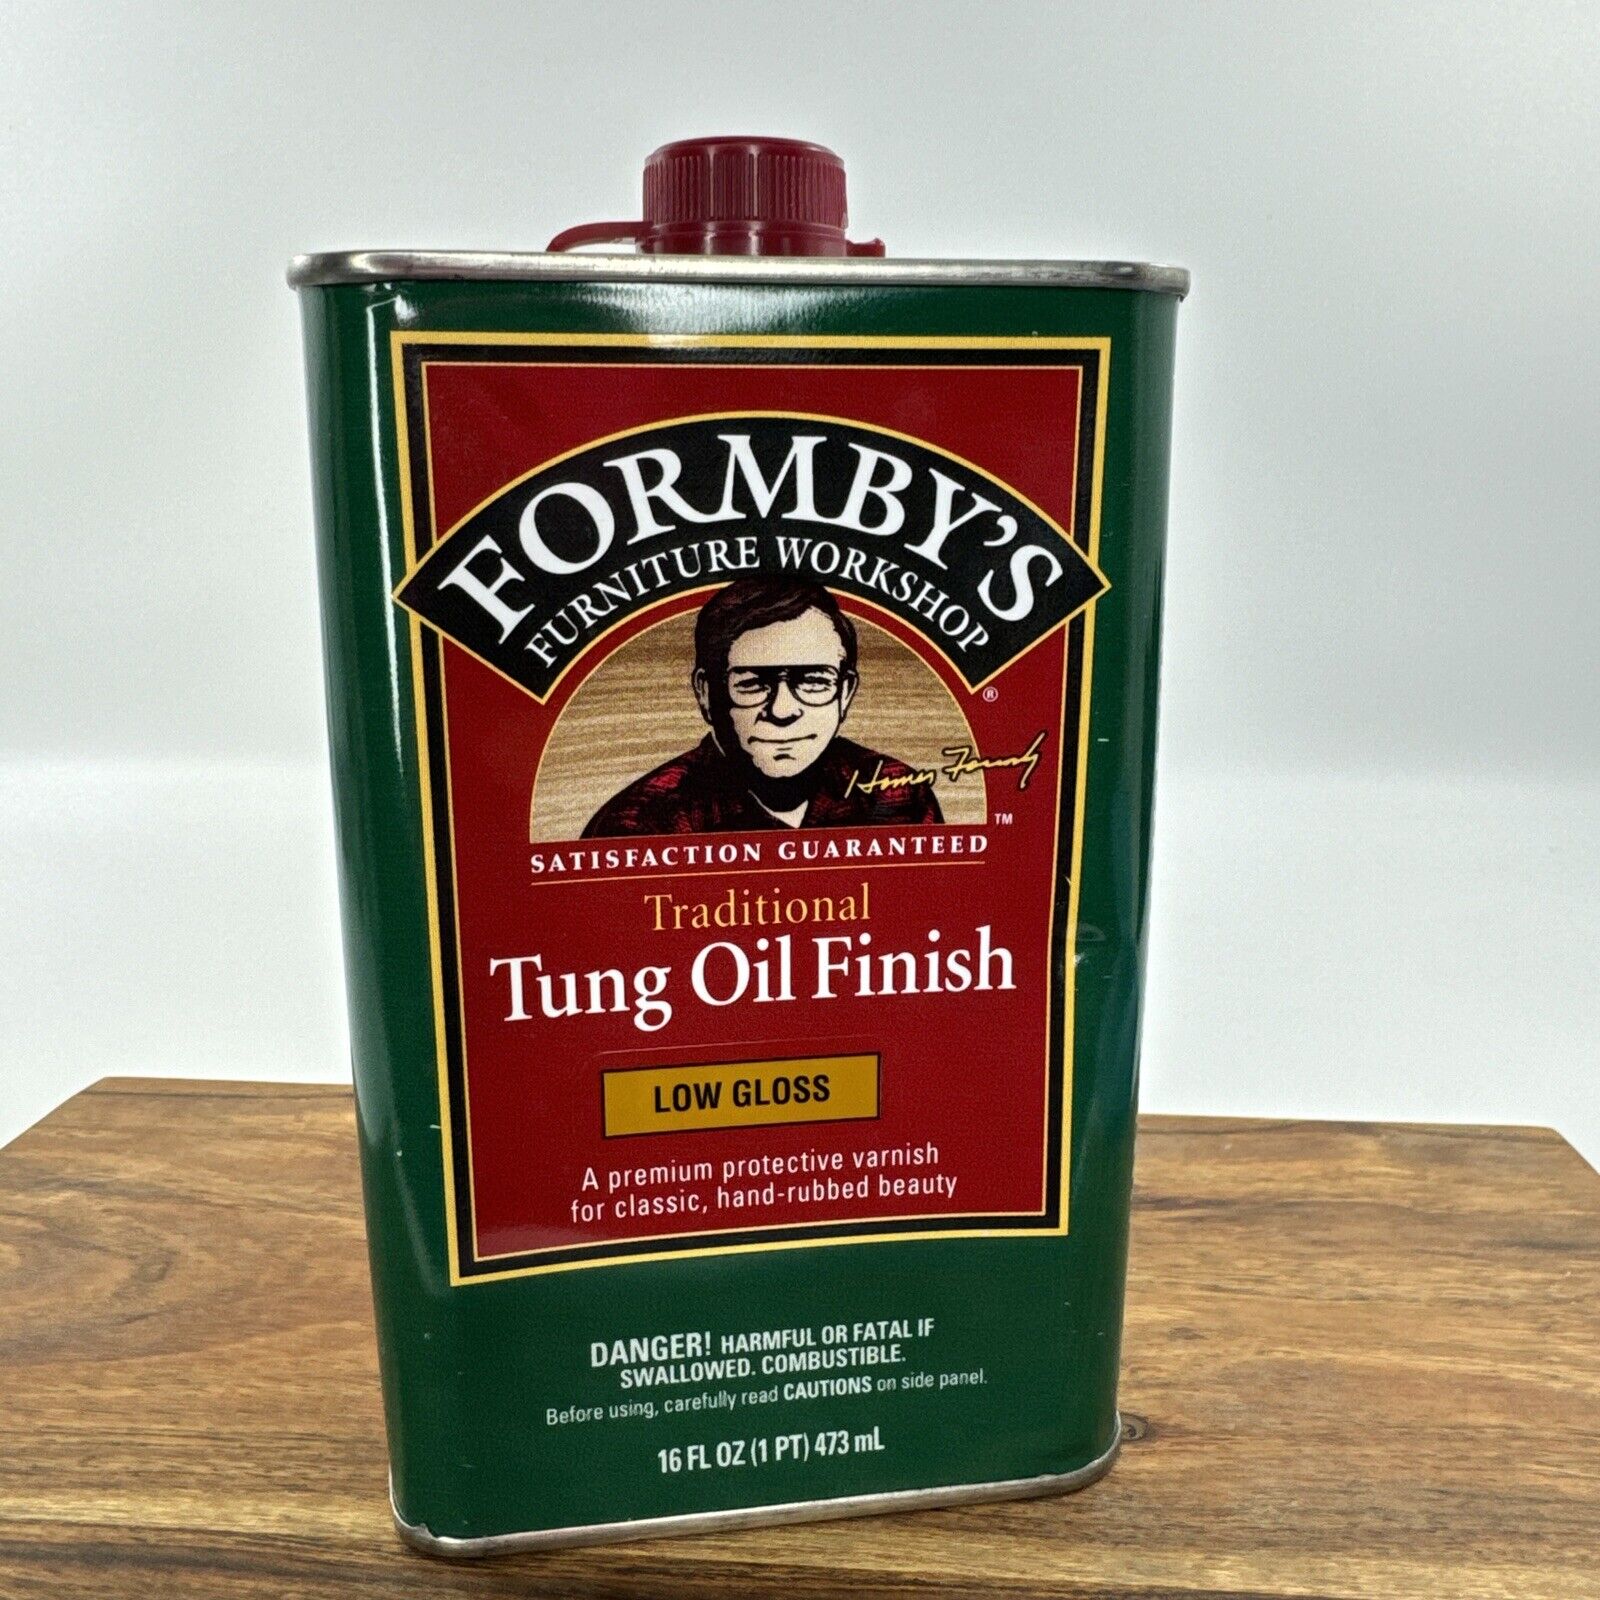 Formbys Traditional Tung Oil Finish LOW GLOSS 16oz New Sealed Metal Tin Can